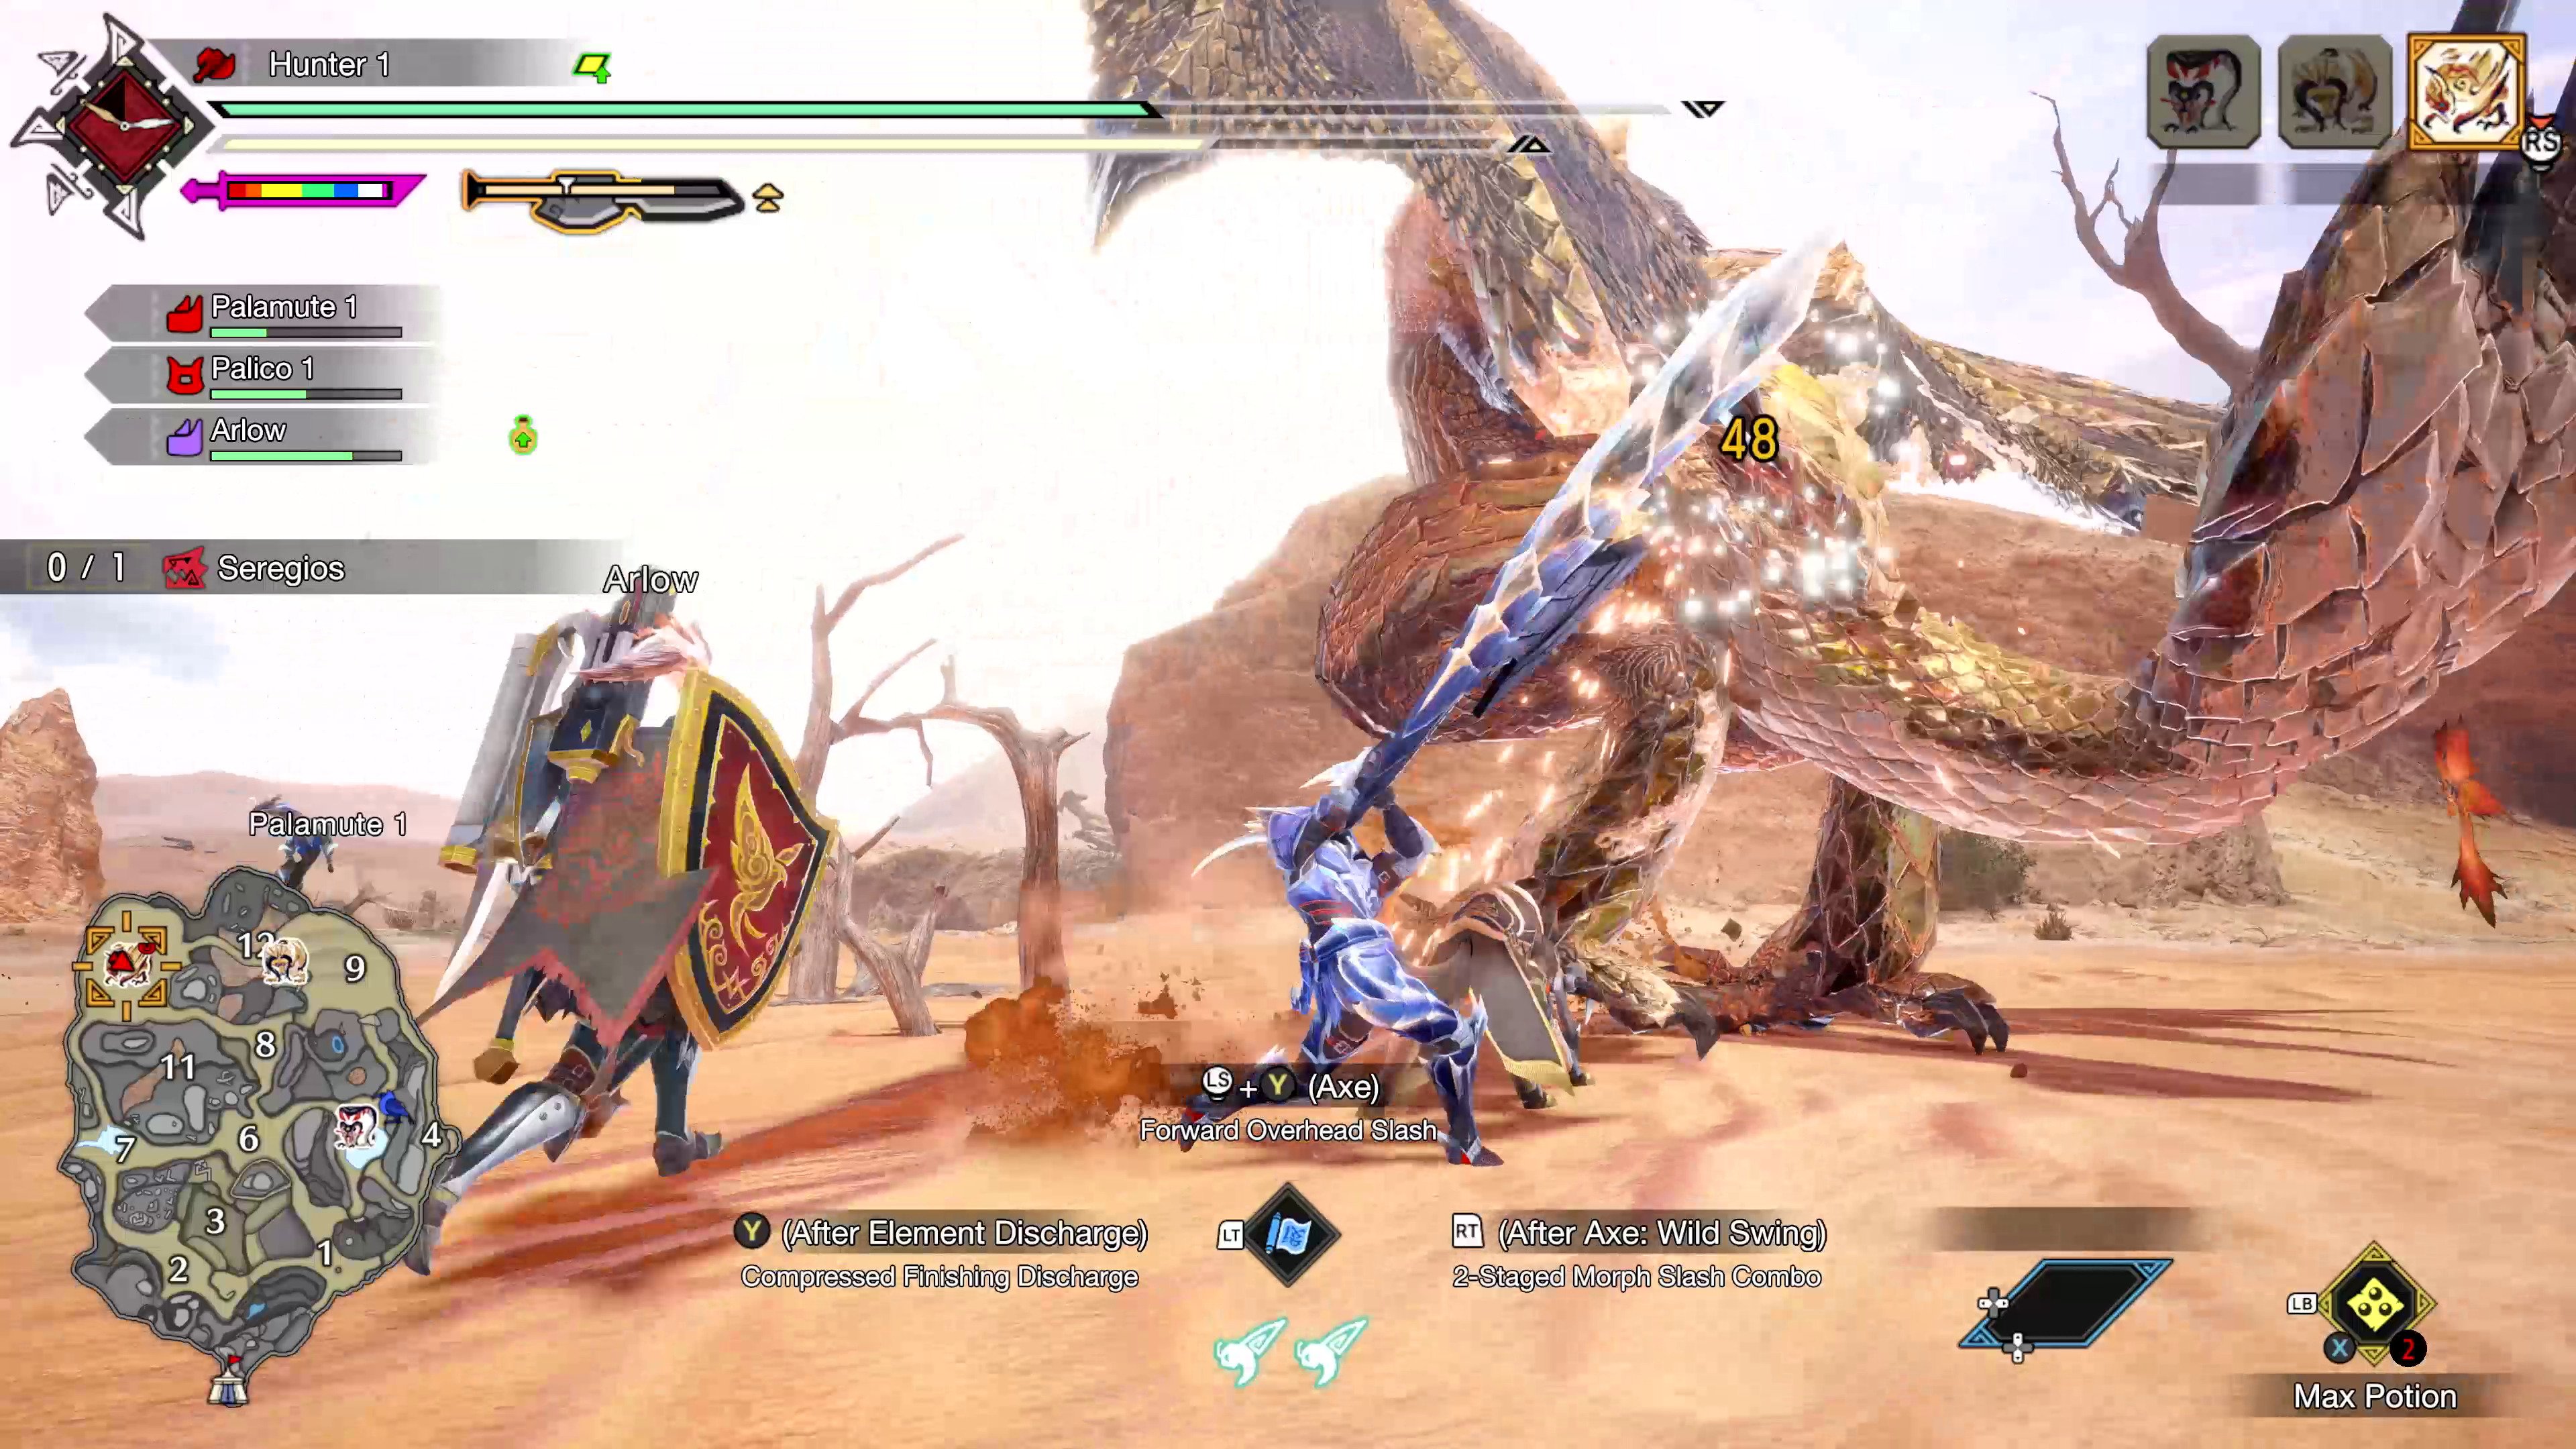 Monster Hunter Rise: Sunbreak – Could this be the series' best expansion  yet?